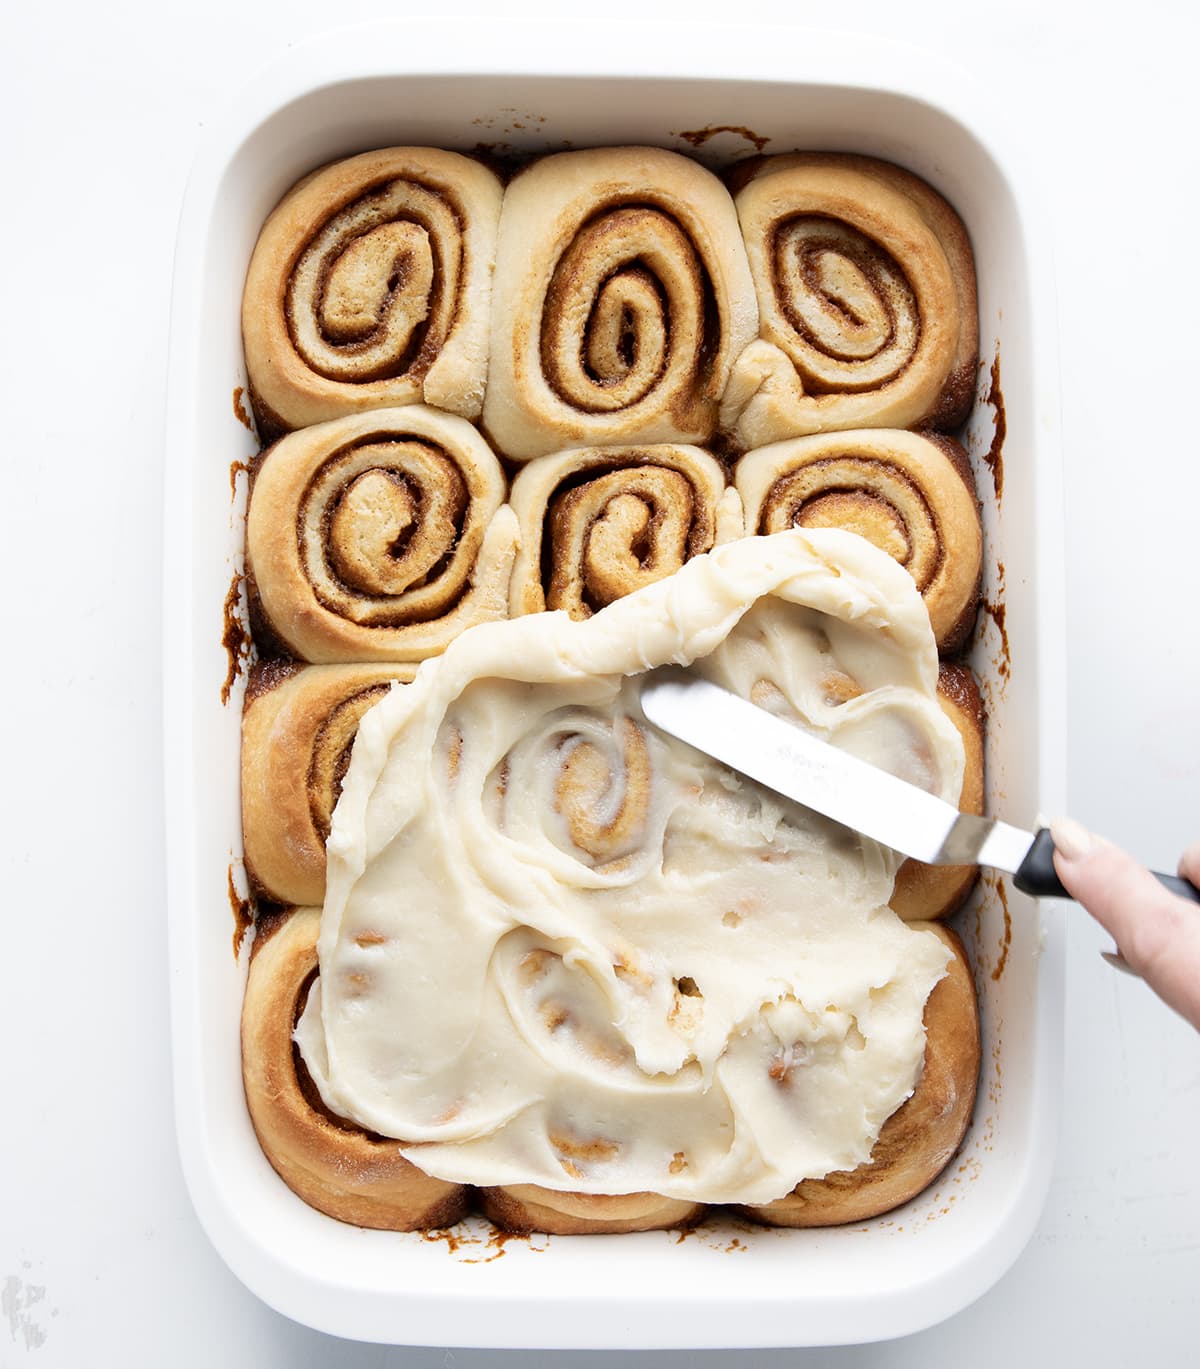 Spreading frosting over Gingerbread Cinnamon Rolls.